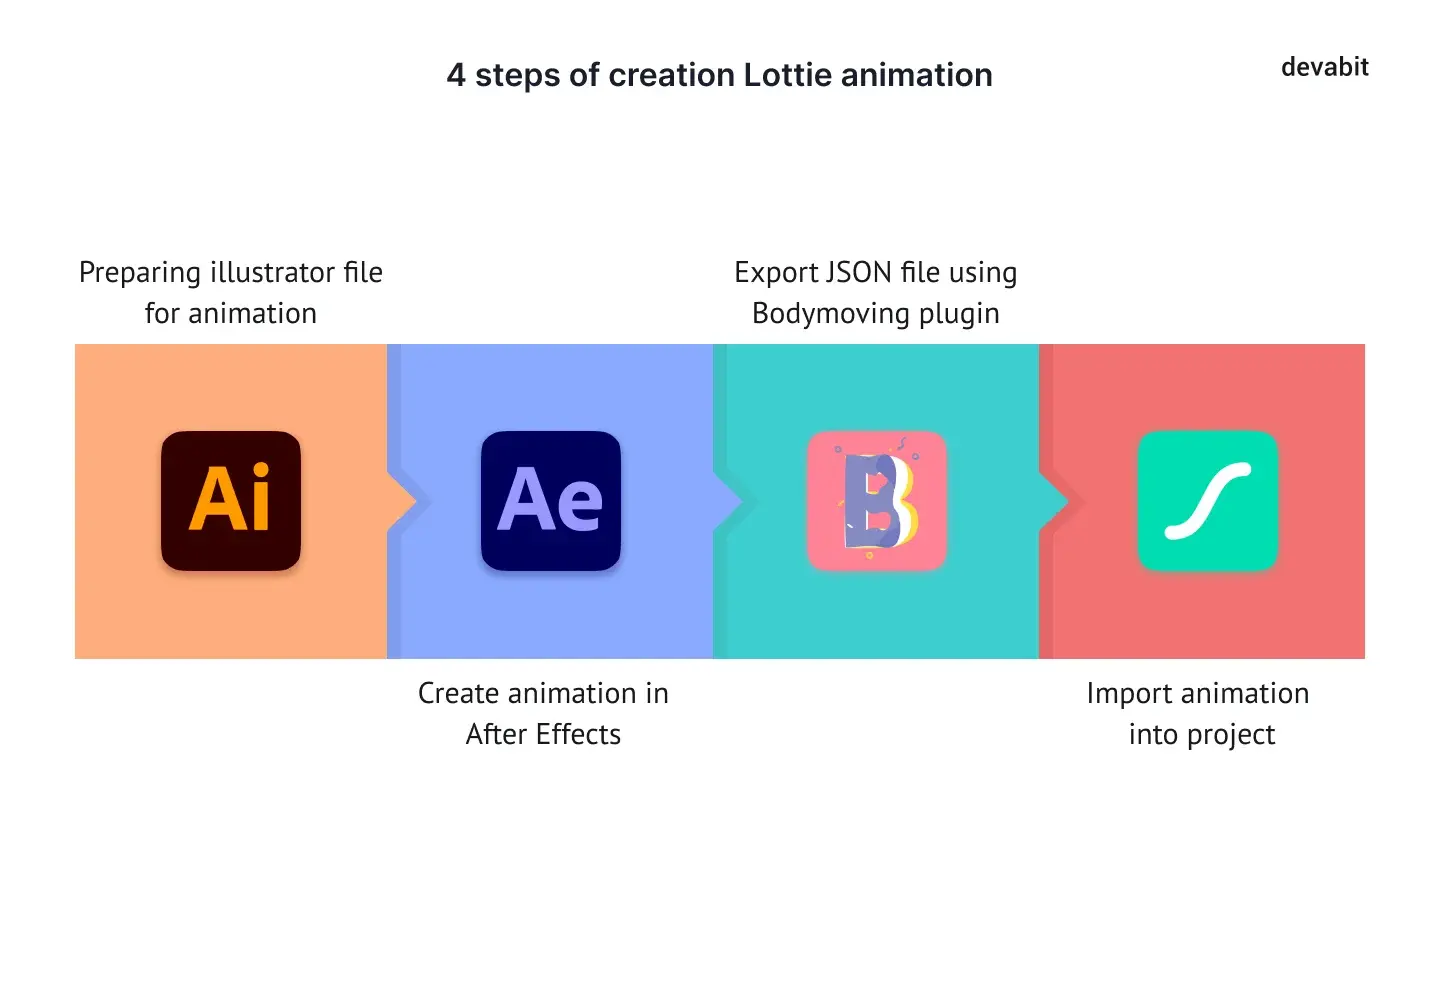 How to Create Lottie Animations: 4 Simple Steps